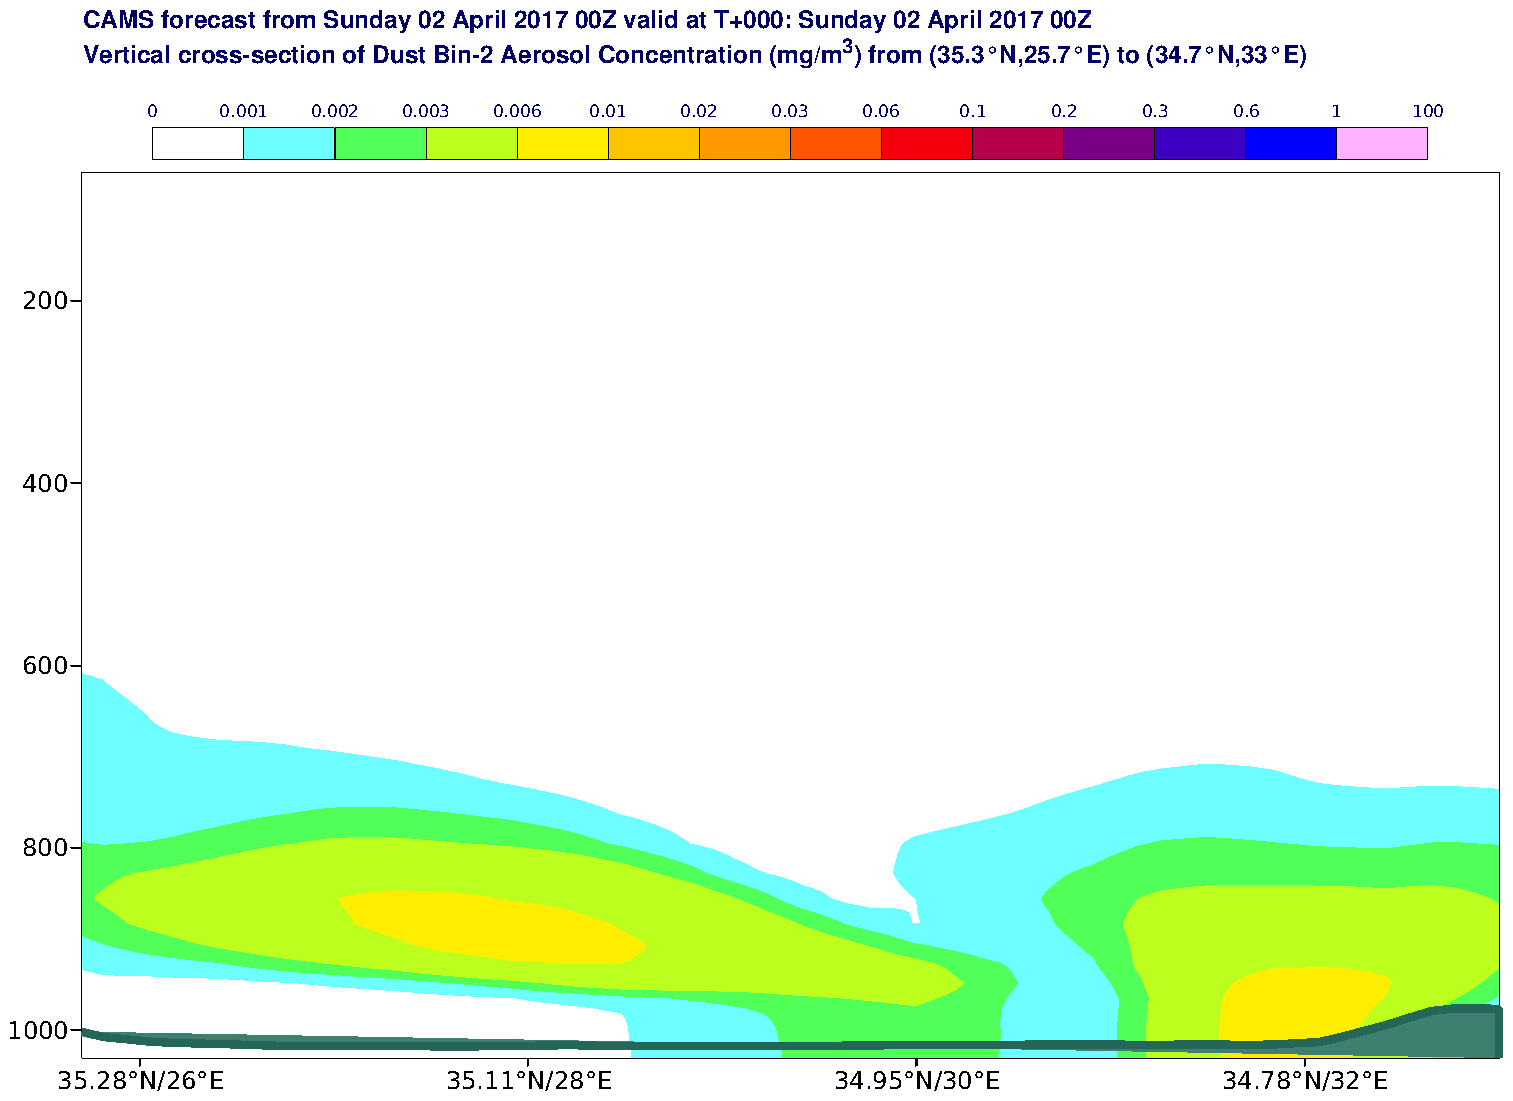 Vertical cross-section of Dust Bin-2 Aerosol Concentration (mg/m3) valid at T0 - 2017-04-02 00:00